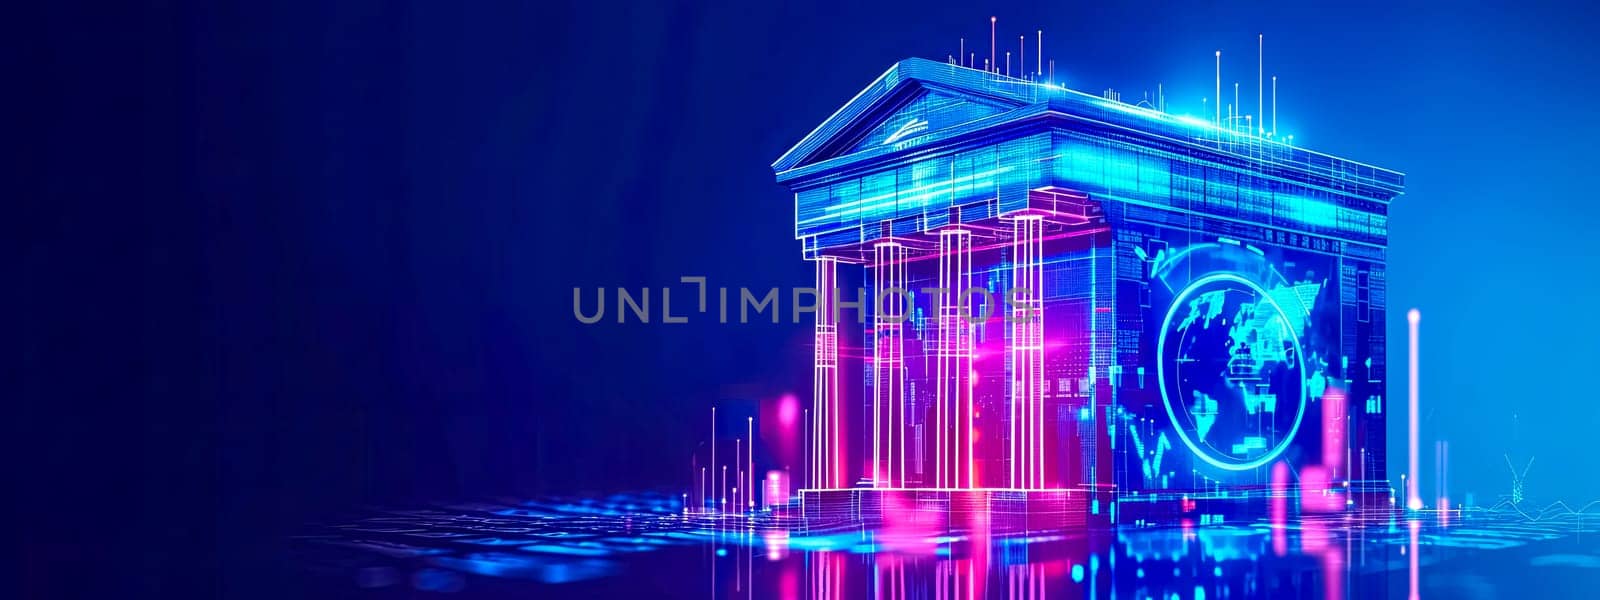 Futuristic Cybernetic Building in Neon Hues - Digital Technology and Virtual Reality Concept by Edophoto